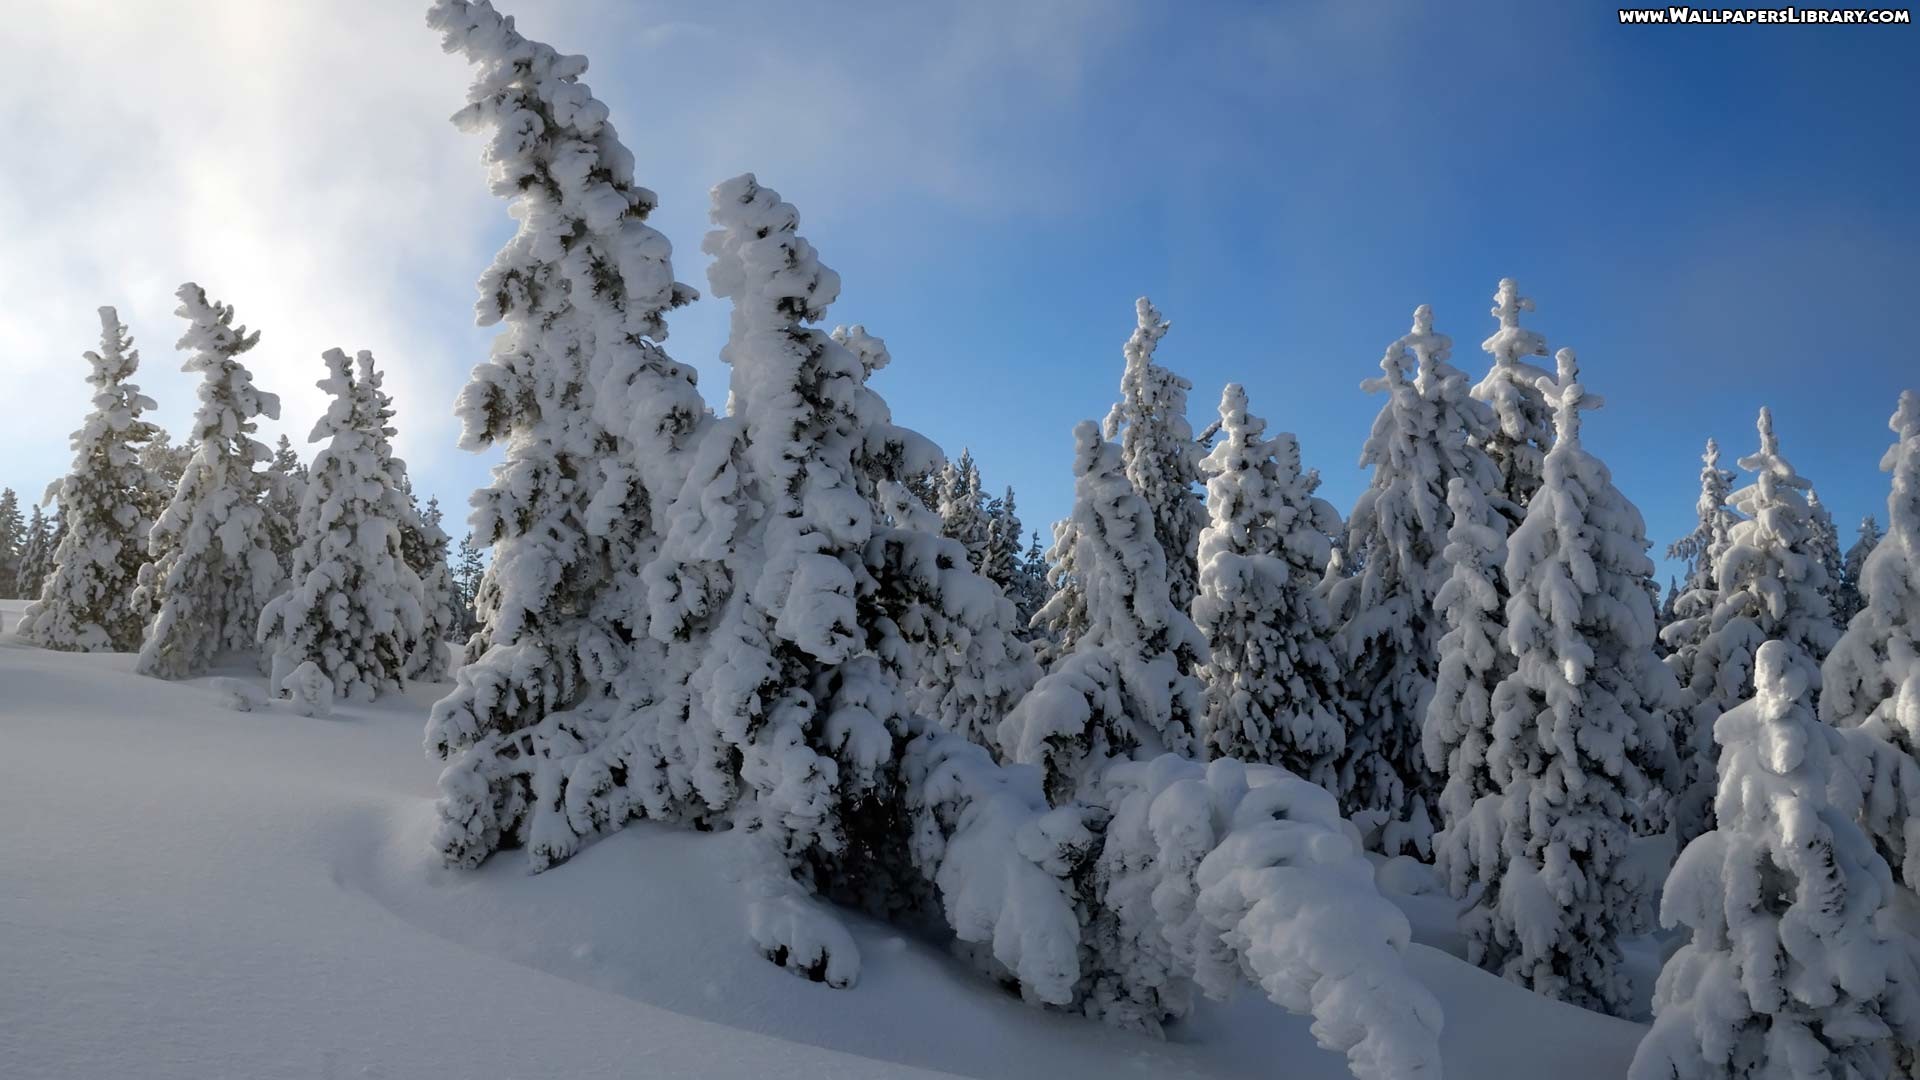 1920x1080 Snow Forest Wallpaper 8498 Hd Wallpapers in Nature - Imagesci.com